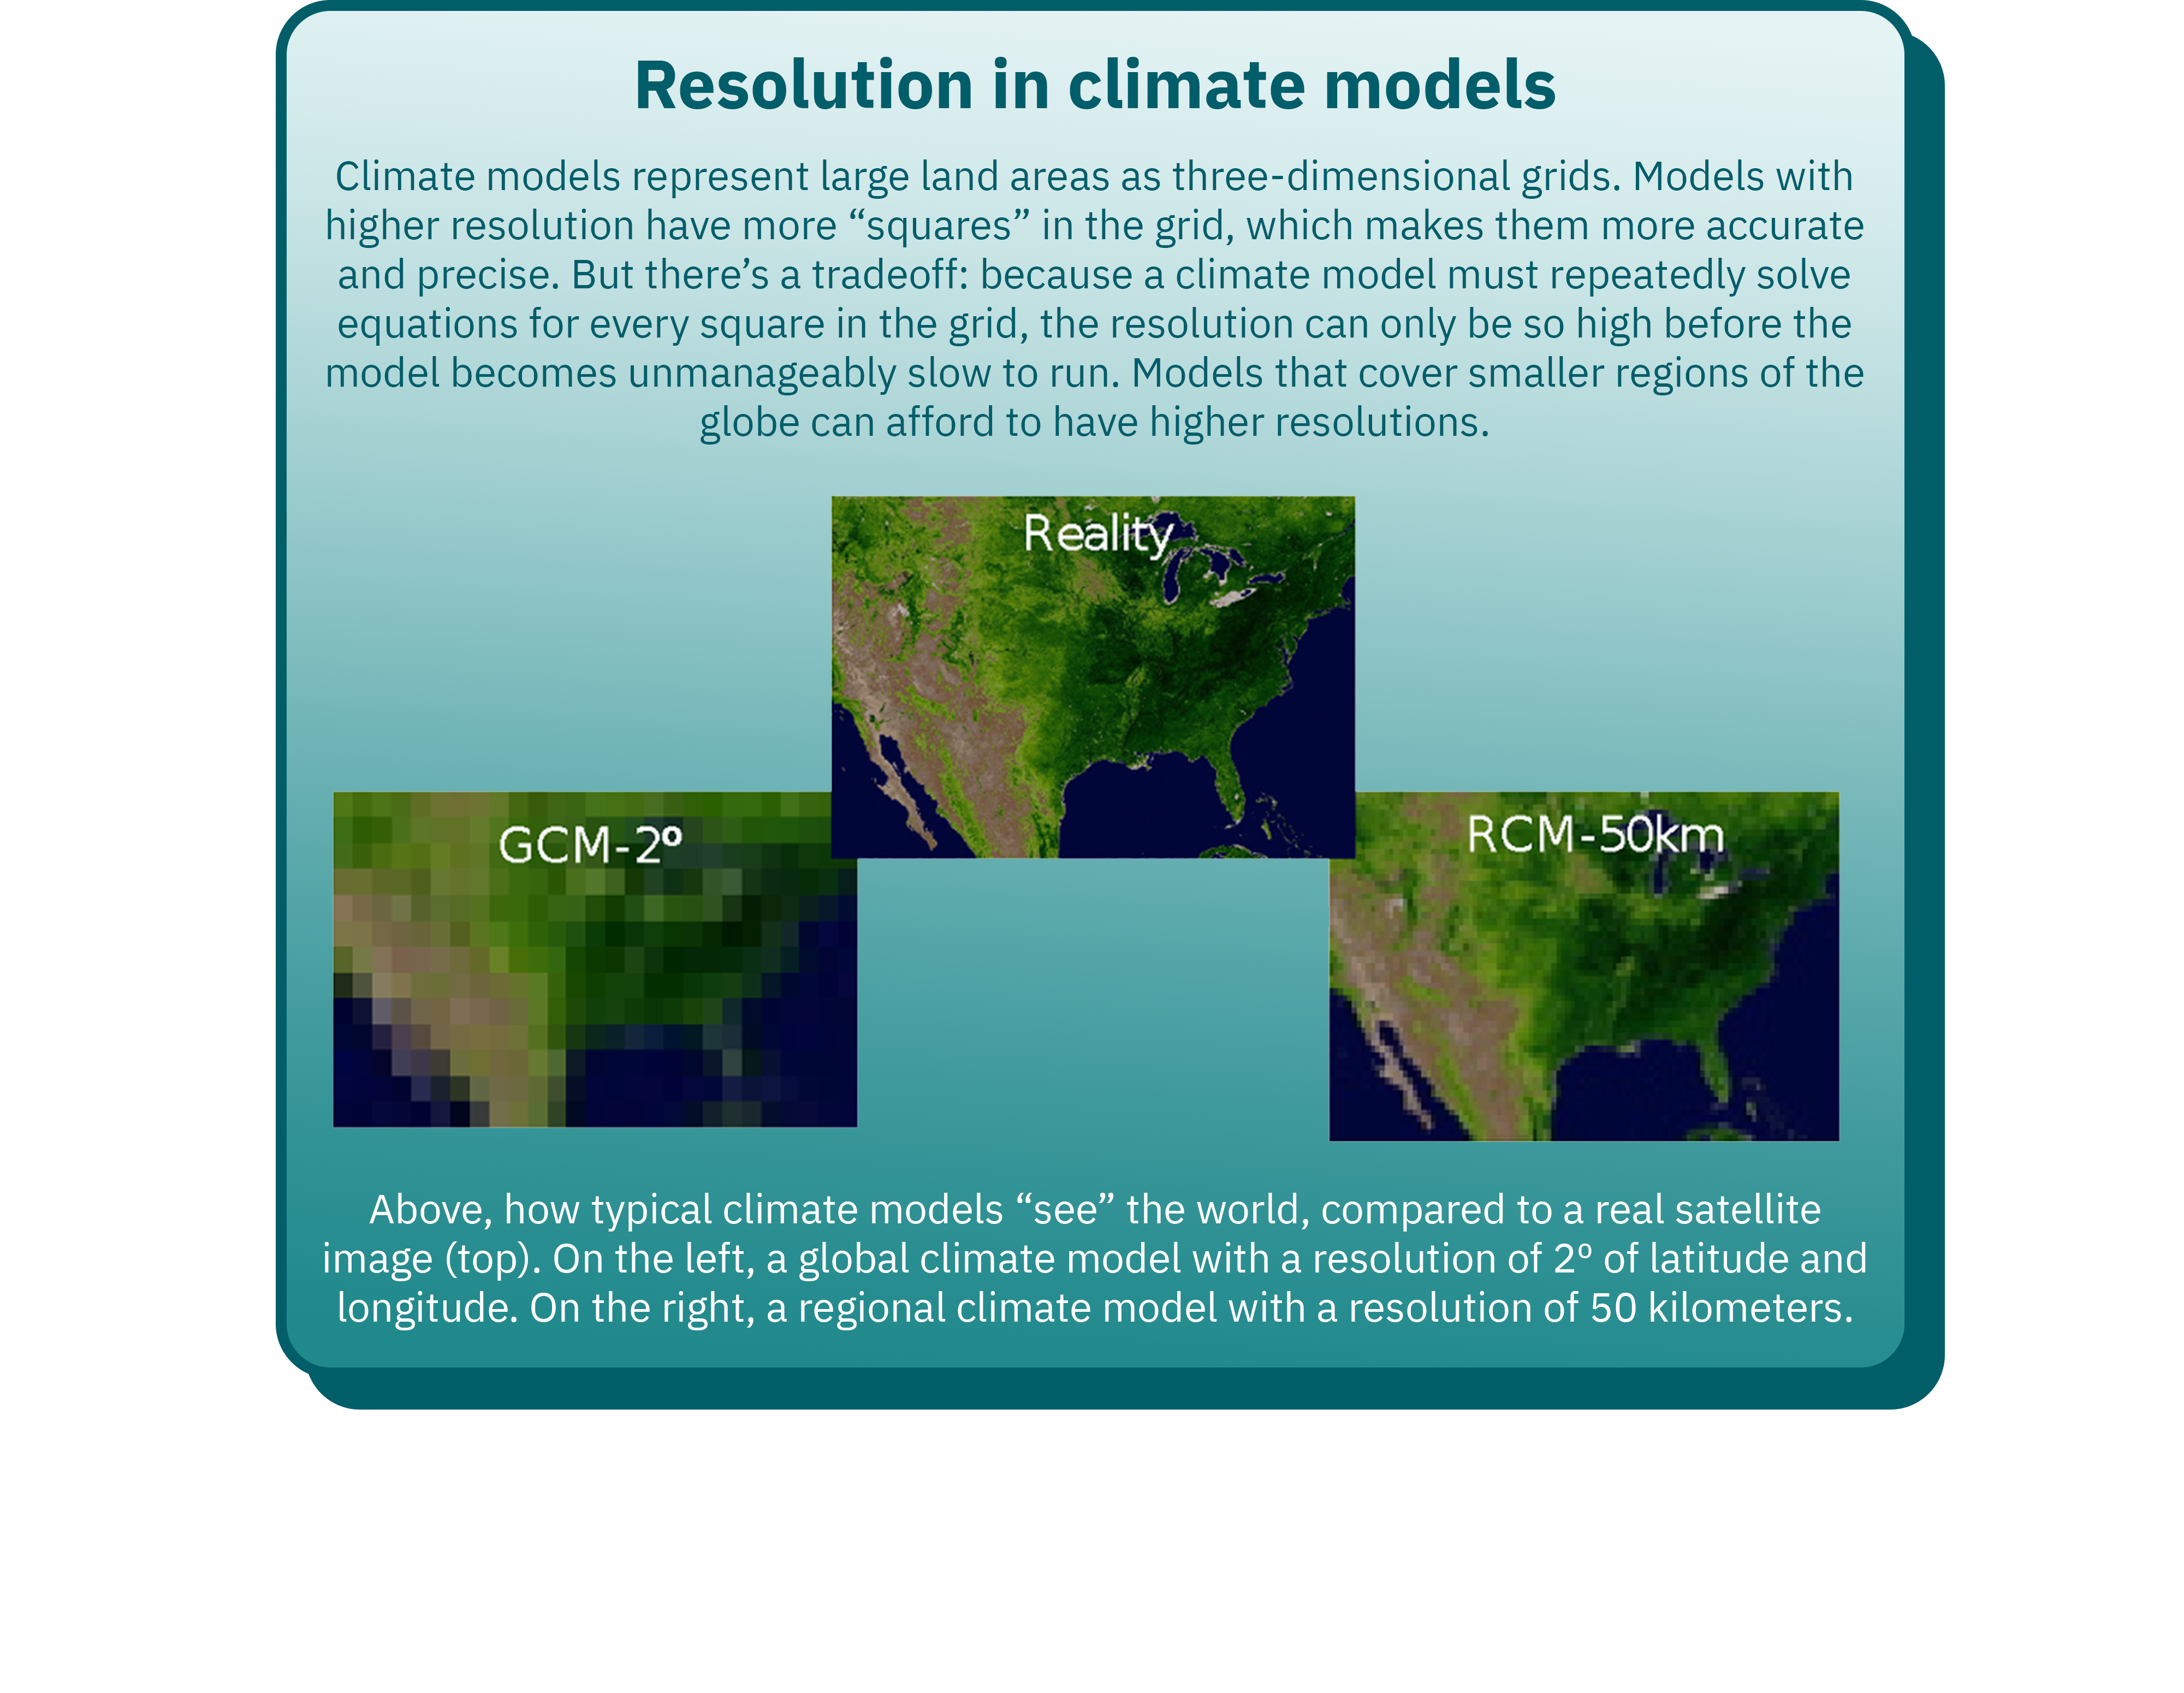 Resolution in Climate Models. Climate models represent large land areas as three-dimensional grids. Models with higher resolution have more “squares” in the grid, which makes them more accurate and precise. But there’s a tradeoff: because a climate model must repeatedly solve equations for every square in the grid, the resolution can only be so high before the model becomes unmanageably slow to run. Models that cover smaller regions of the globe can afford to have higher resolutions. This graphic shows how typical climate models “see” the world, compared to a real satellite image (top). On the left, a global climate model with a resolution of 2º of latitude and longitude. On the right, a regional climate model with a resolution of 50 kilometers.